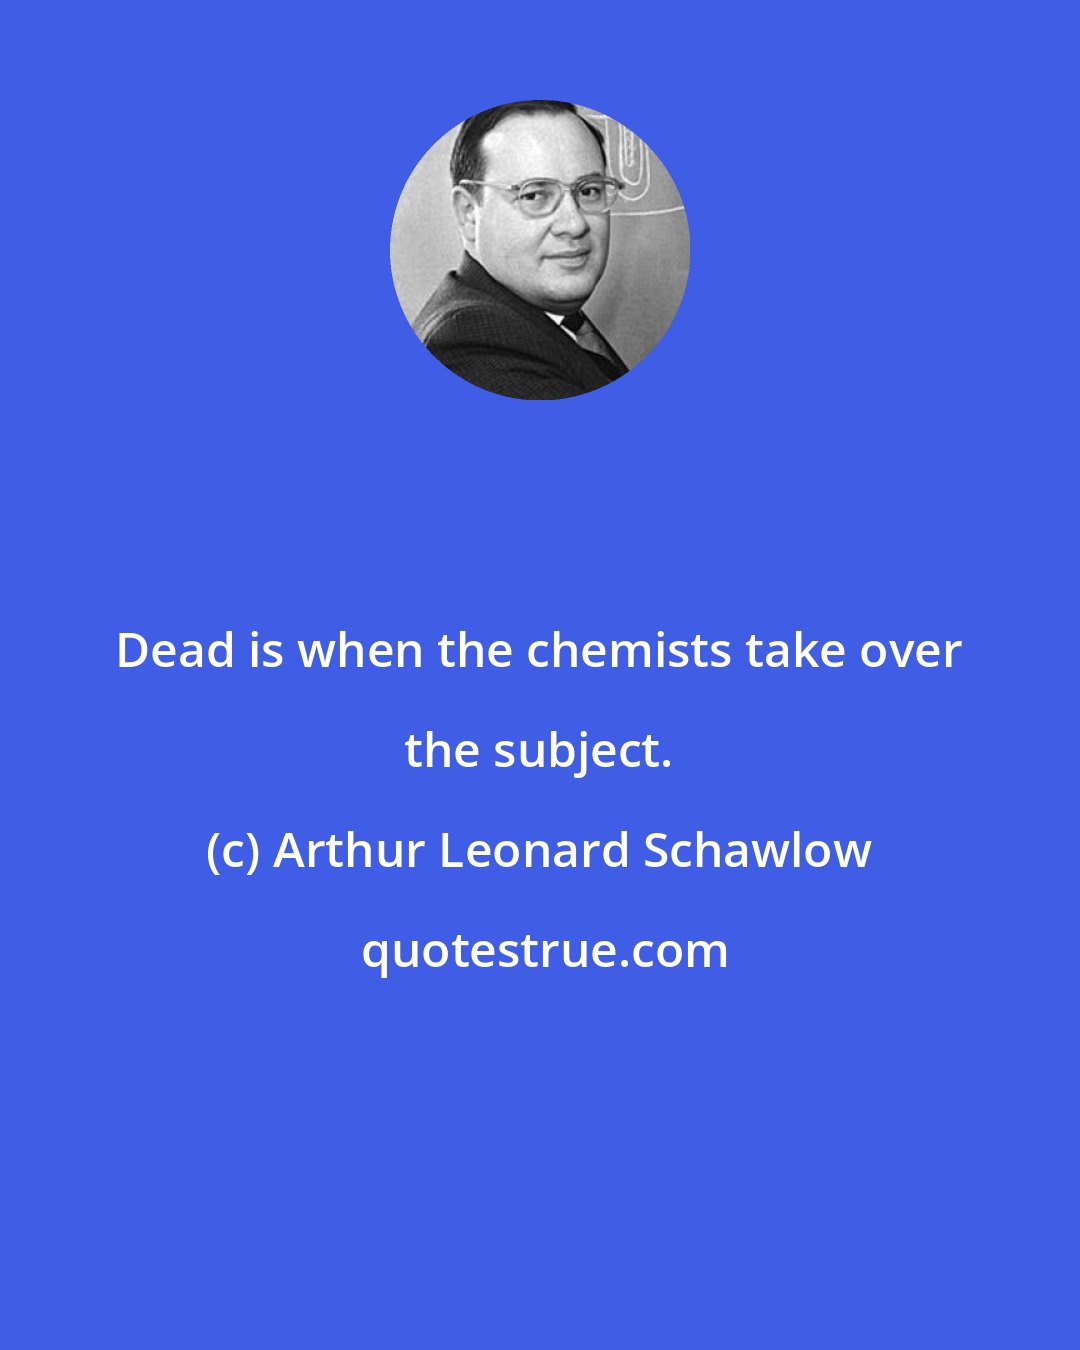 Arthur Leonard Schawlow: Dead is when the chemists take over the subject.